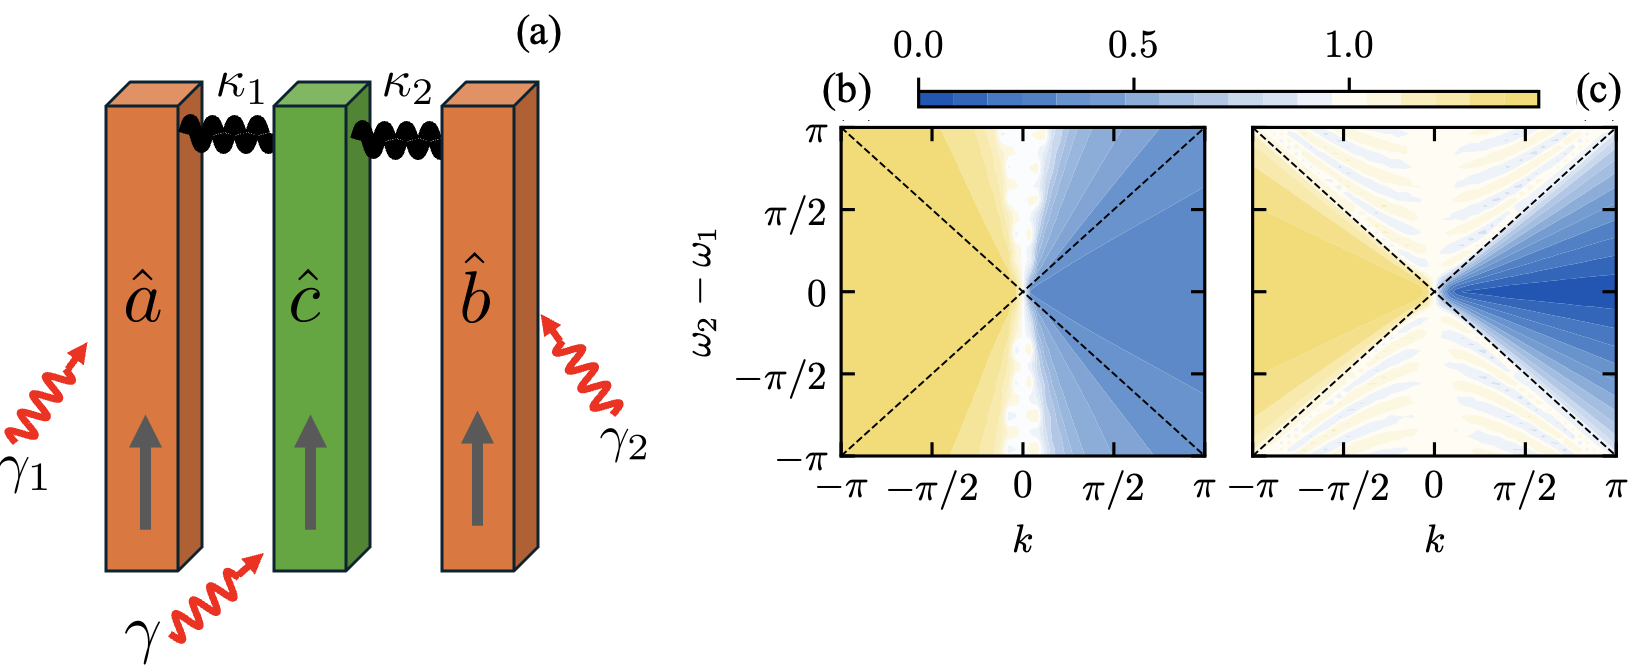 Figure 1. (a) Schematic of the coupled waveguide model with all three waveguides a ̂, b ̂, c ̂ experiencing dissipation. The reduced model of waveguides a ̂ and b ̂ (orange waveguides) represents the anti-PT symmetric system. In (b) and (c) the color represents a measure of synchronization with blue and yellow indicating the system synchronizes, whereas white indicating that no synchronization occurs. (b) represents the quantum case while (c) is for the classical counterpart. The classical system synchronizes within the well-defined classically predicted boundaries of synchronization given by the dashed lines, while the quantum system is ubiquitous and synchronizes well beyond the classical boundaries.